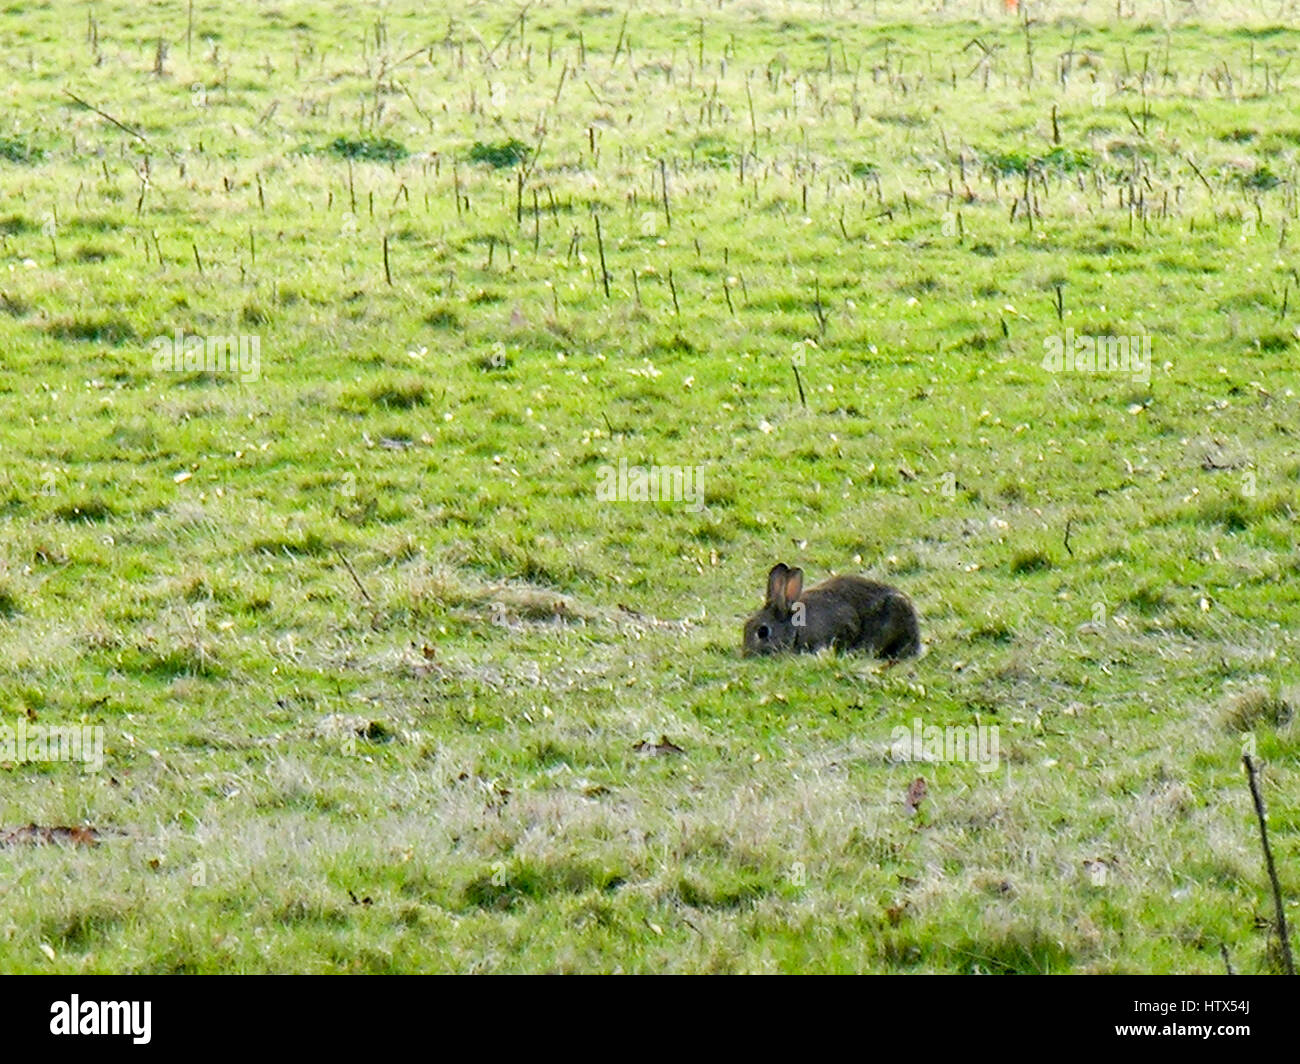 A peaceful rabbit grazes on a field in the distance. Stock Photo